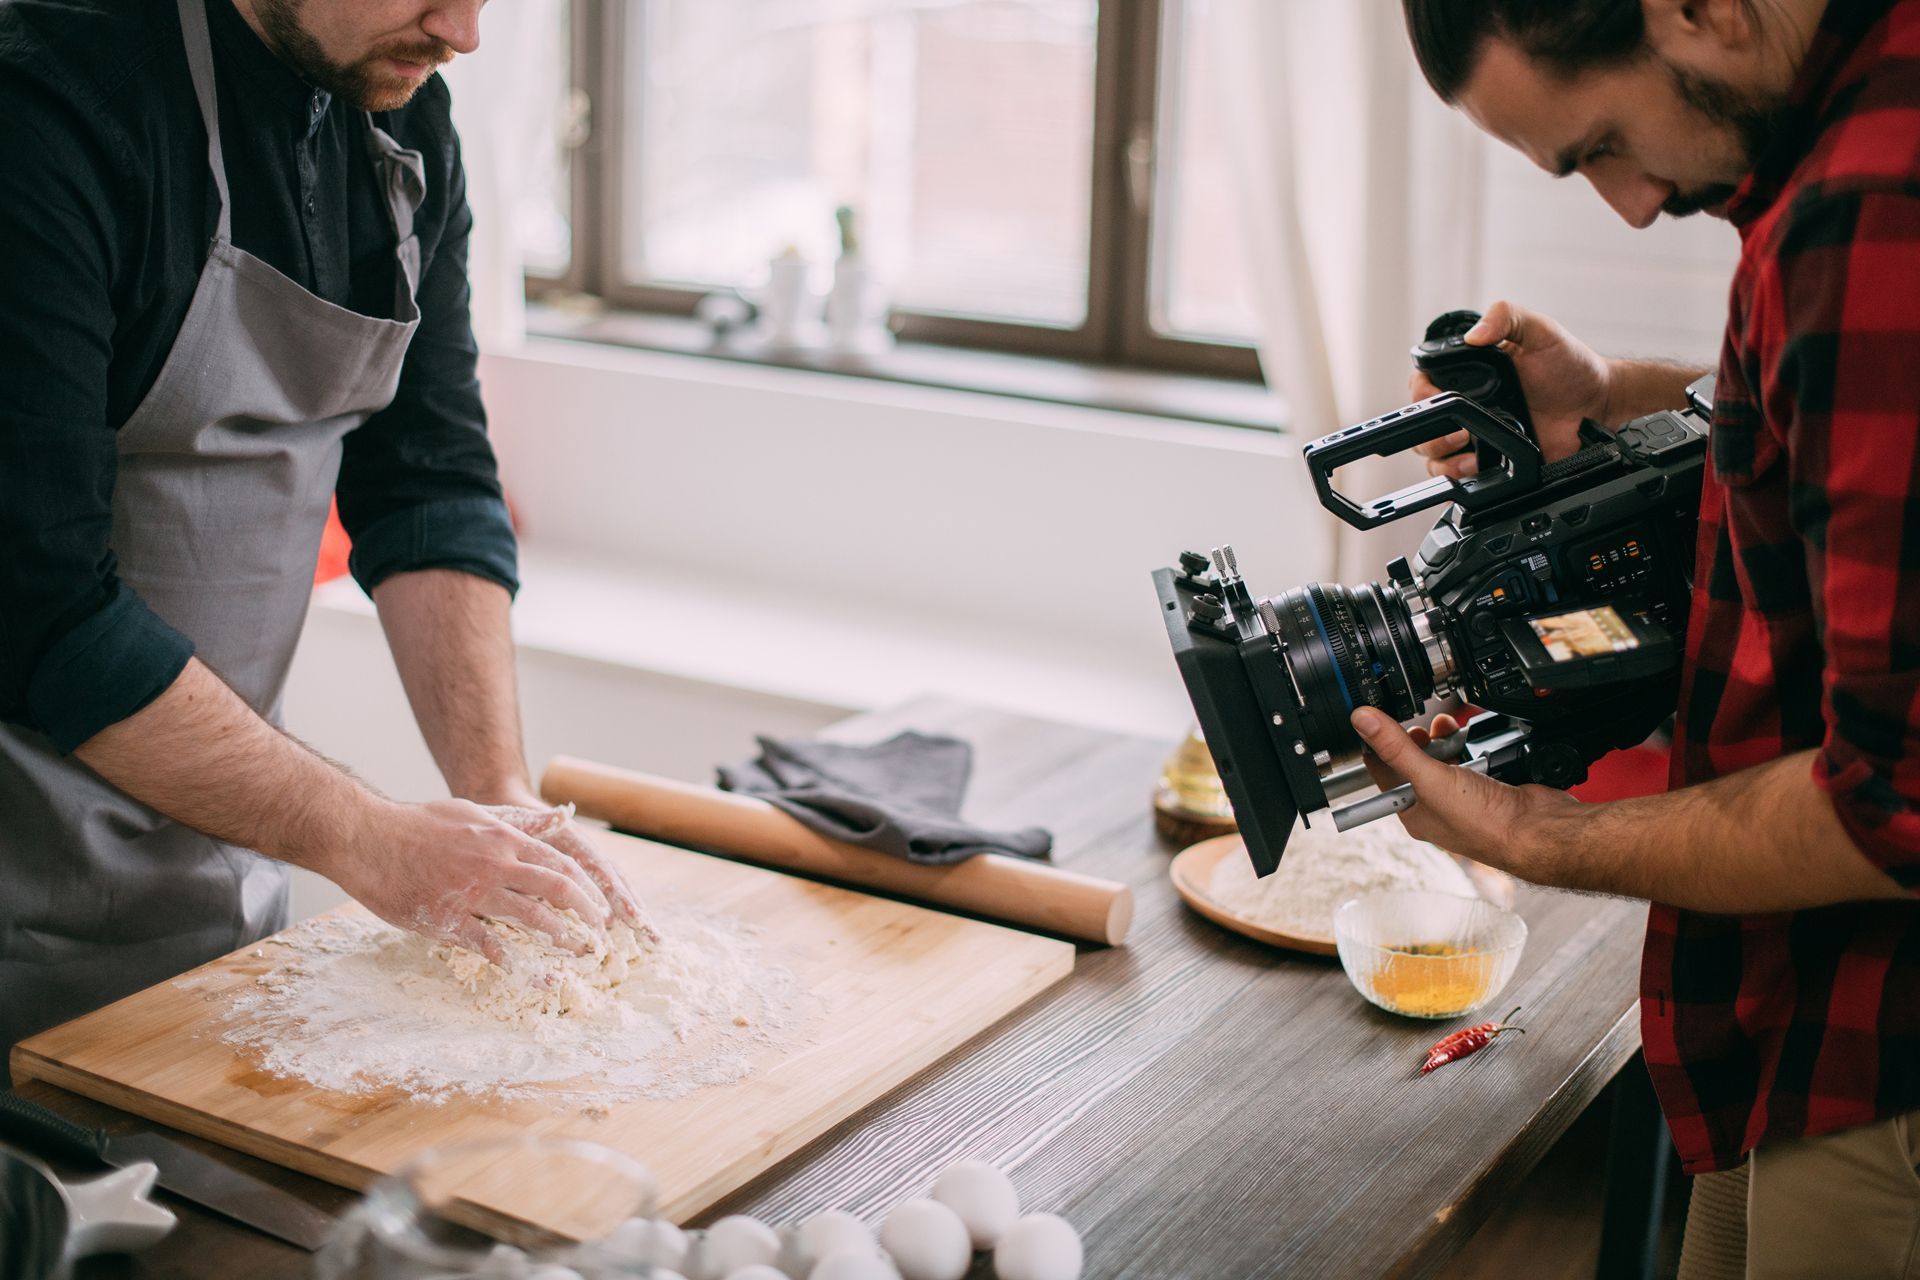 a man is rolling dough on a cutting board while another man takes a video with a camera